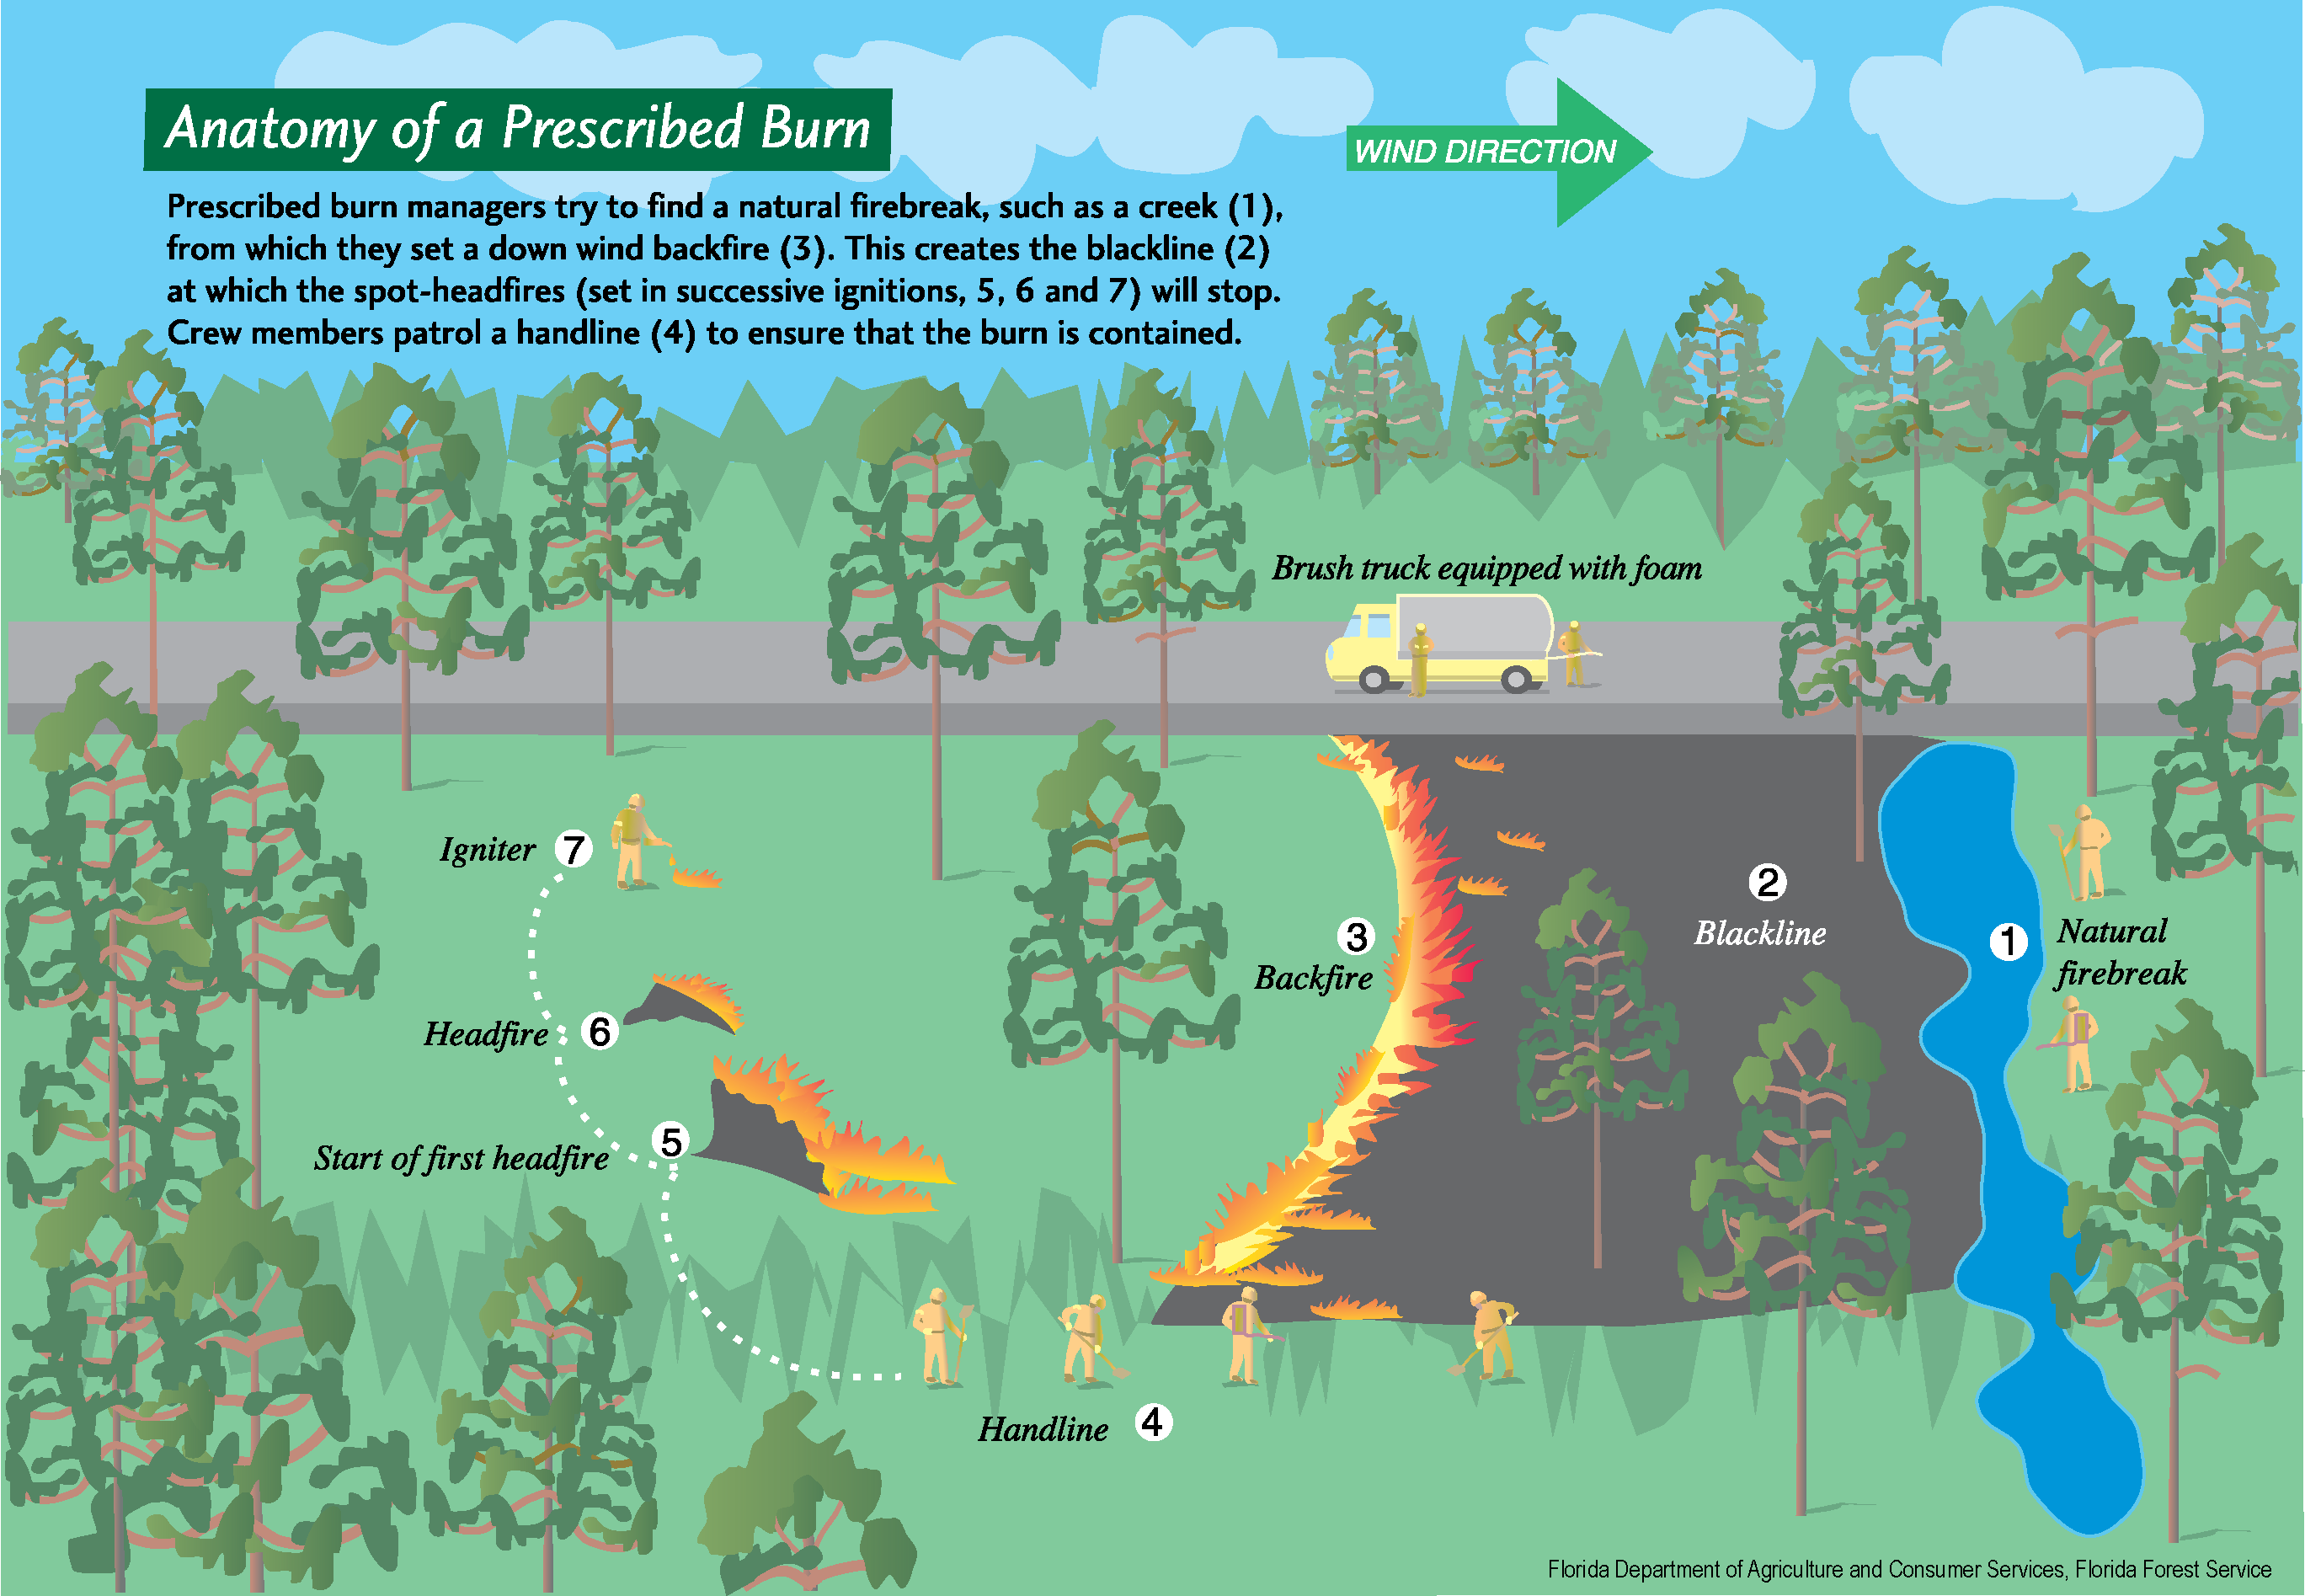 An illustration depicting the anatomy of a prescribed burn